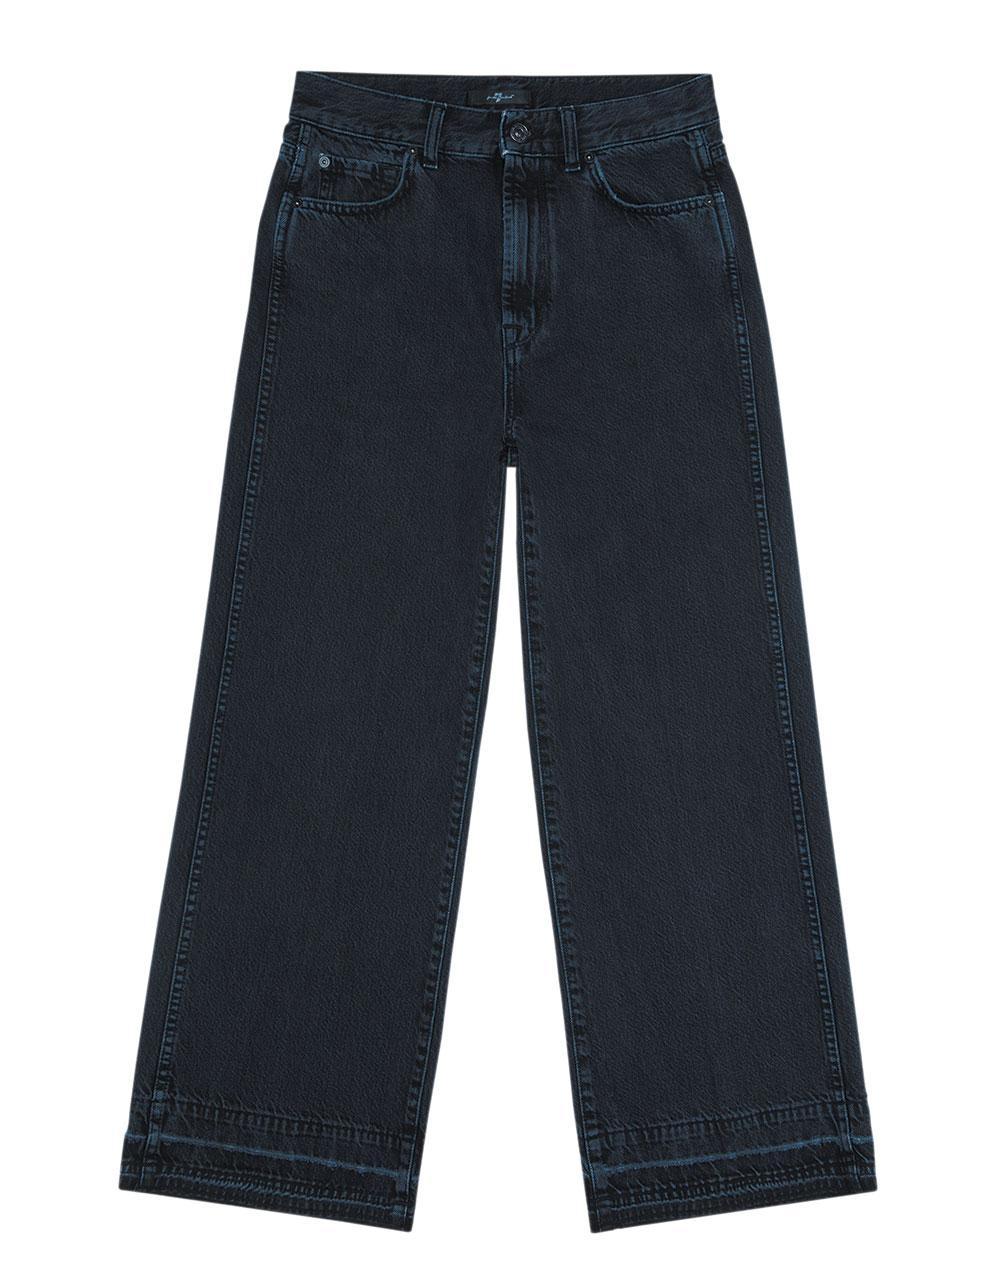 Broek, 7 For All Mankind (240 euro), 7forallmankind.be